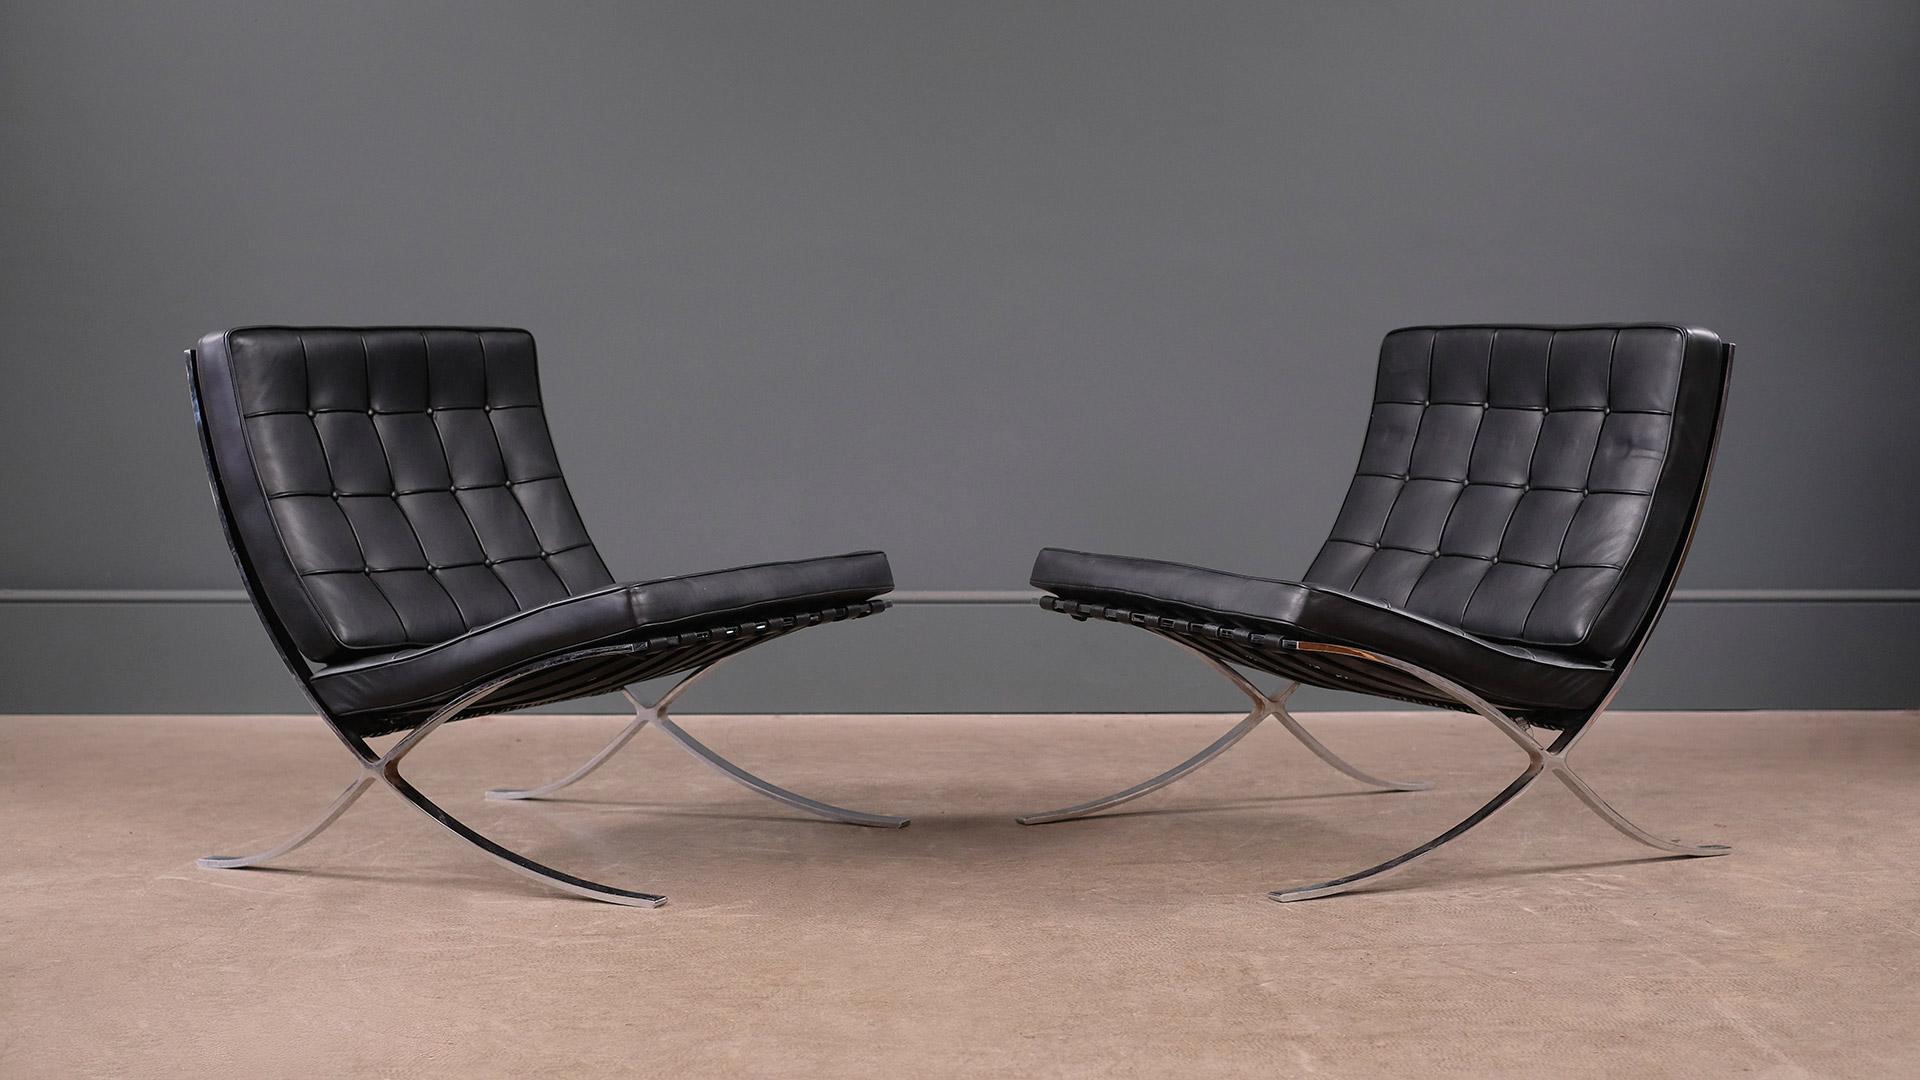 Wonderful pair of vintage Barcelona chairs designed by Mies Van Der Rohe and made by Knoll International. Great light patina and superb quality.